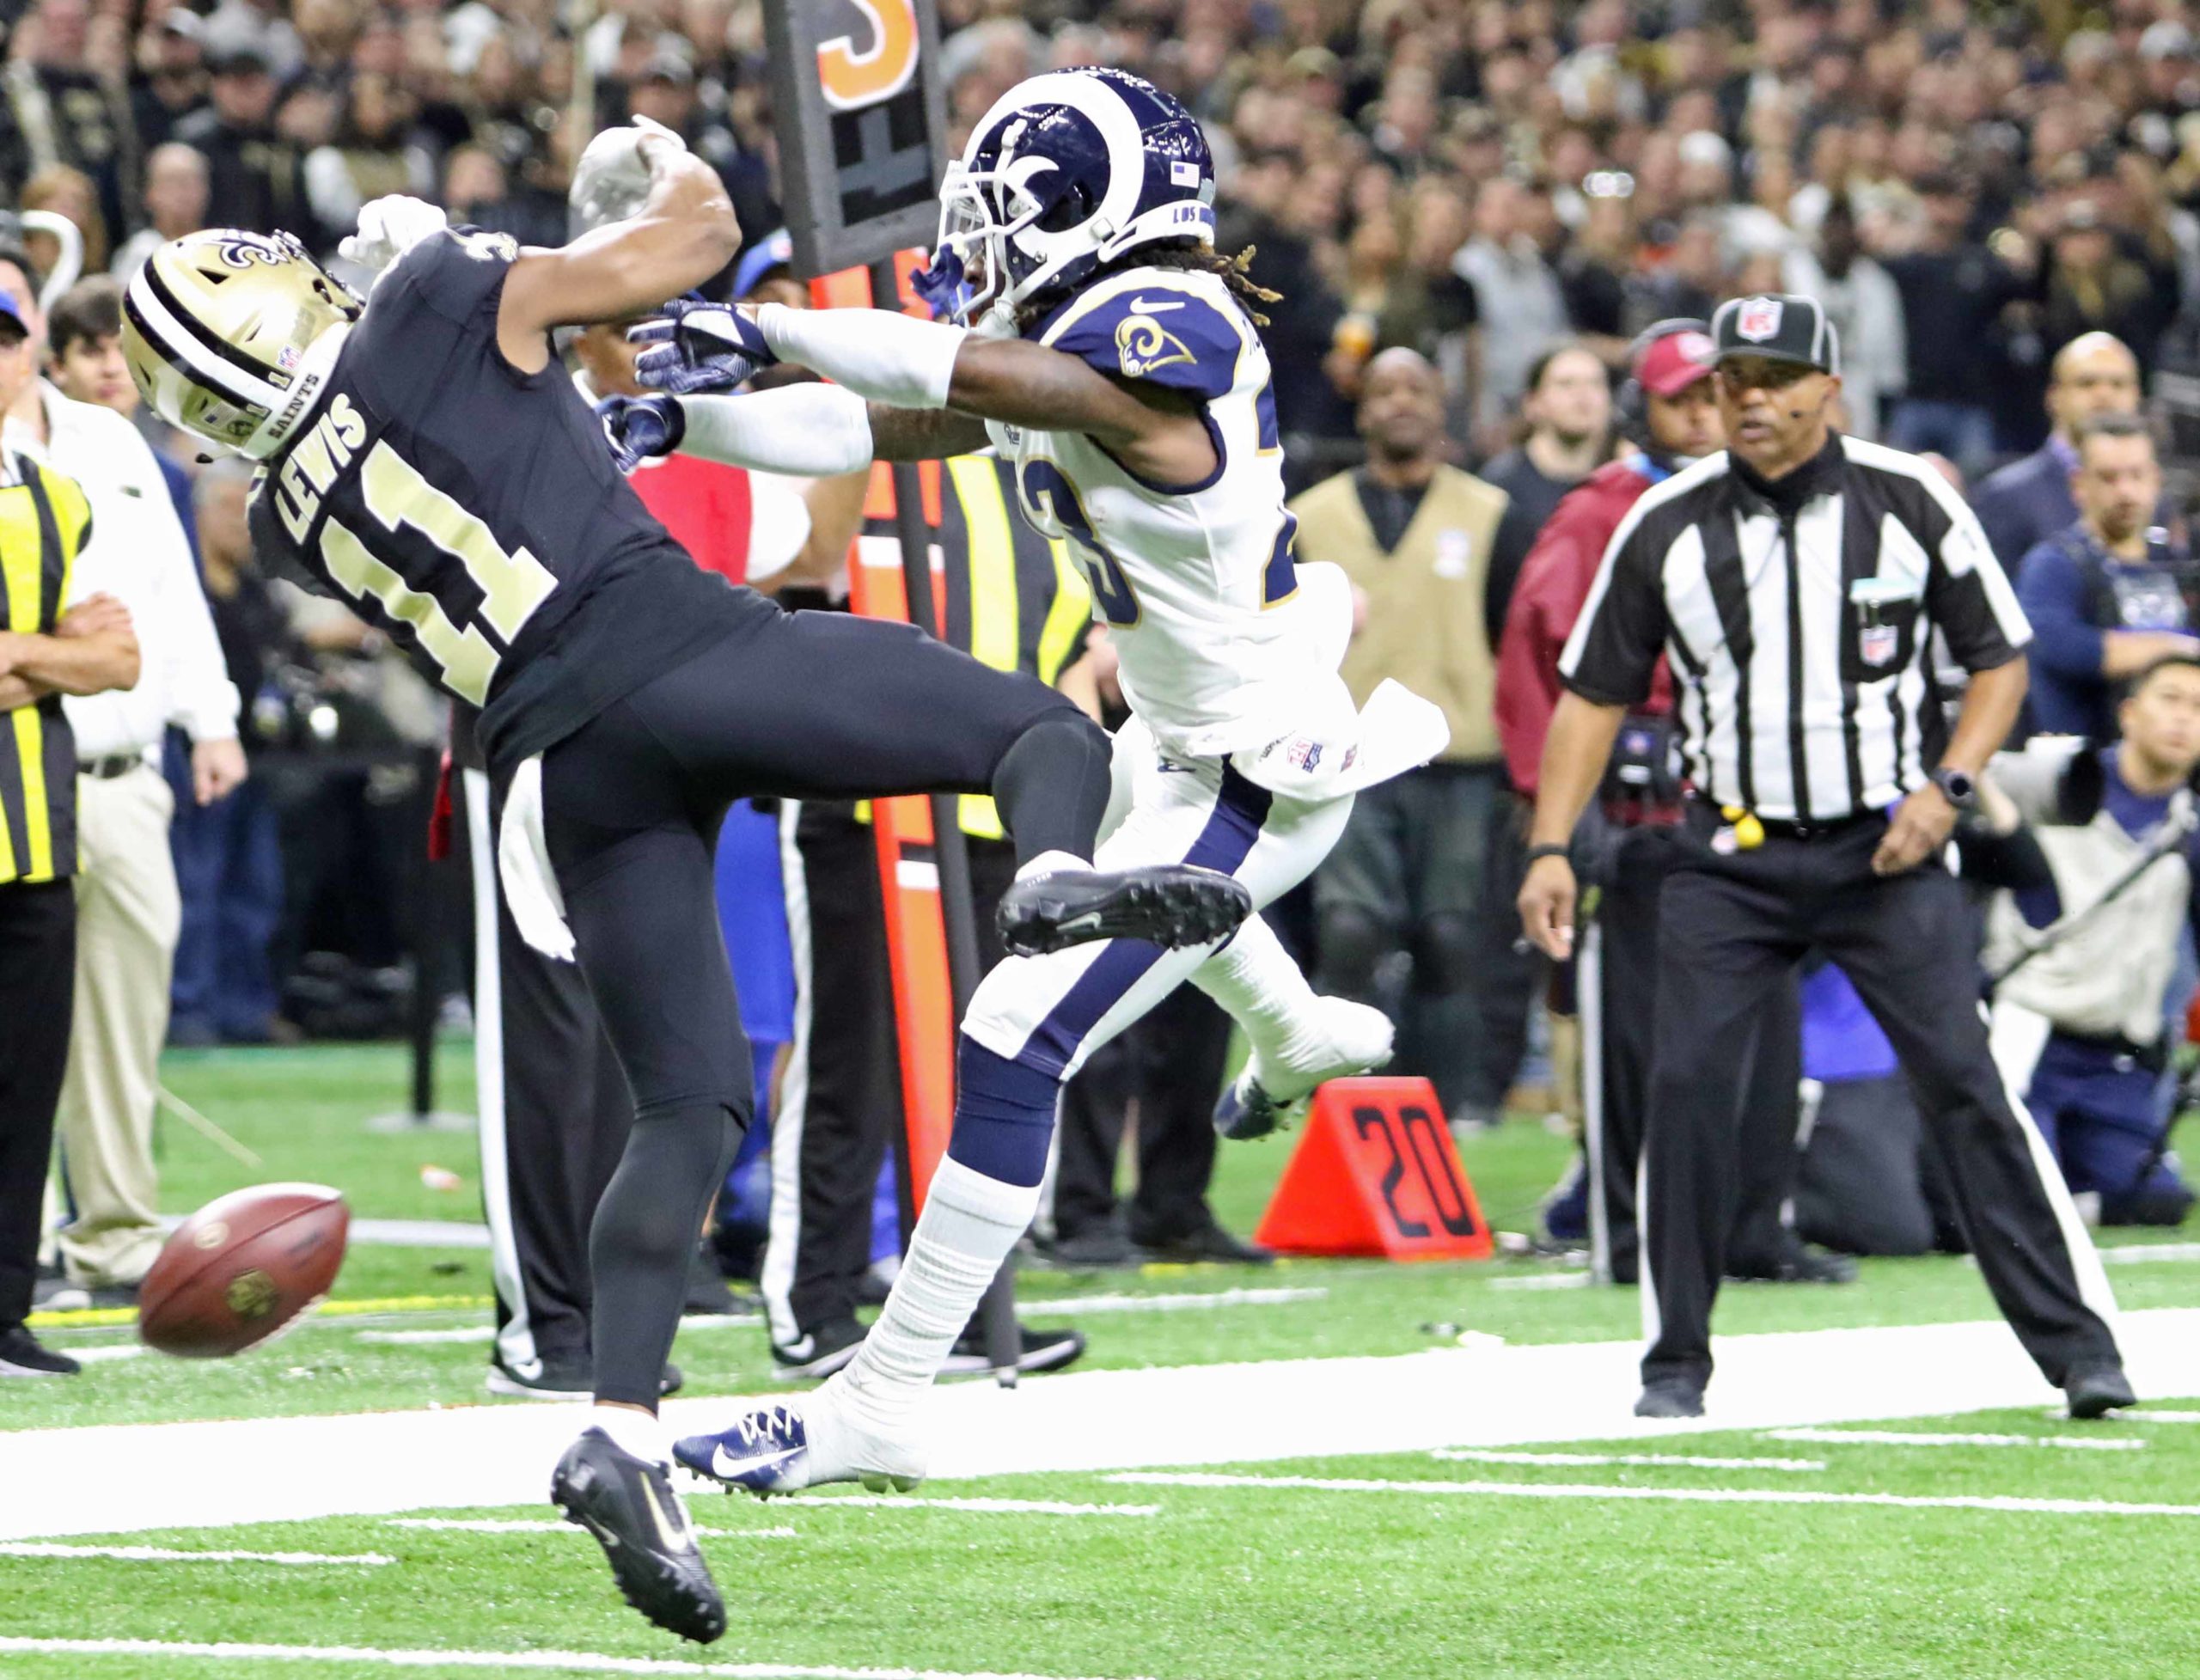 New Orleans Saints wide receiver Tommylee Lewis (11) takes a hard hit by Los Angeles Rams defensive back Nickell Robey-Coleman (23) near the sideline before the ball reaches him during the NFC Championship Game at the Mercedes-Benz Superdome in New Orleans on Sunday, January 20, 2019.  No pass interference was called on this play which forced the Saints to kick a field goal instead of a first down.  (Photo by Peter G. Forest)